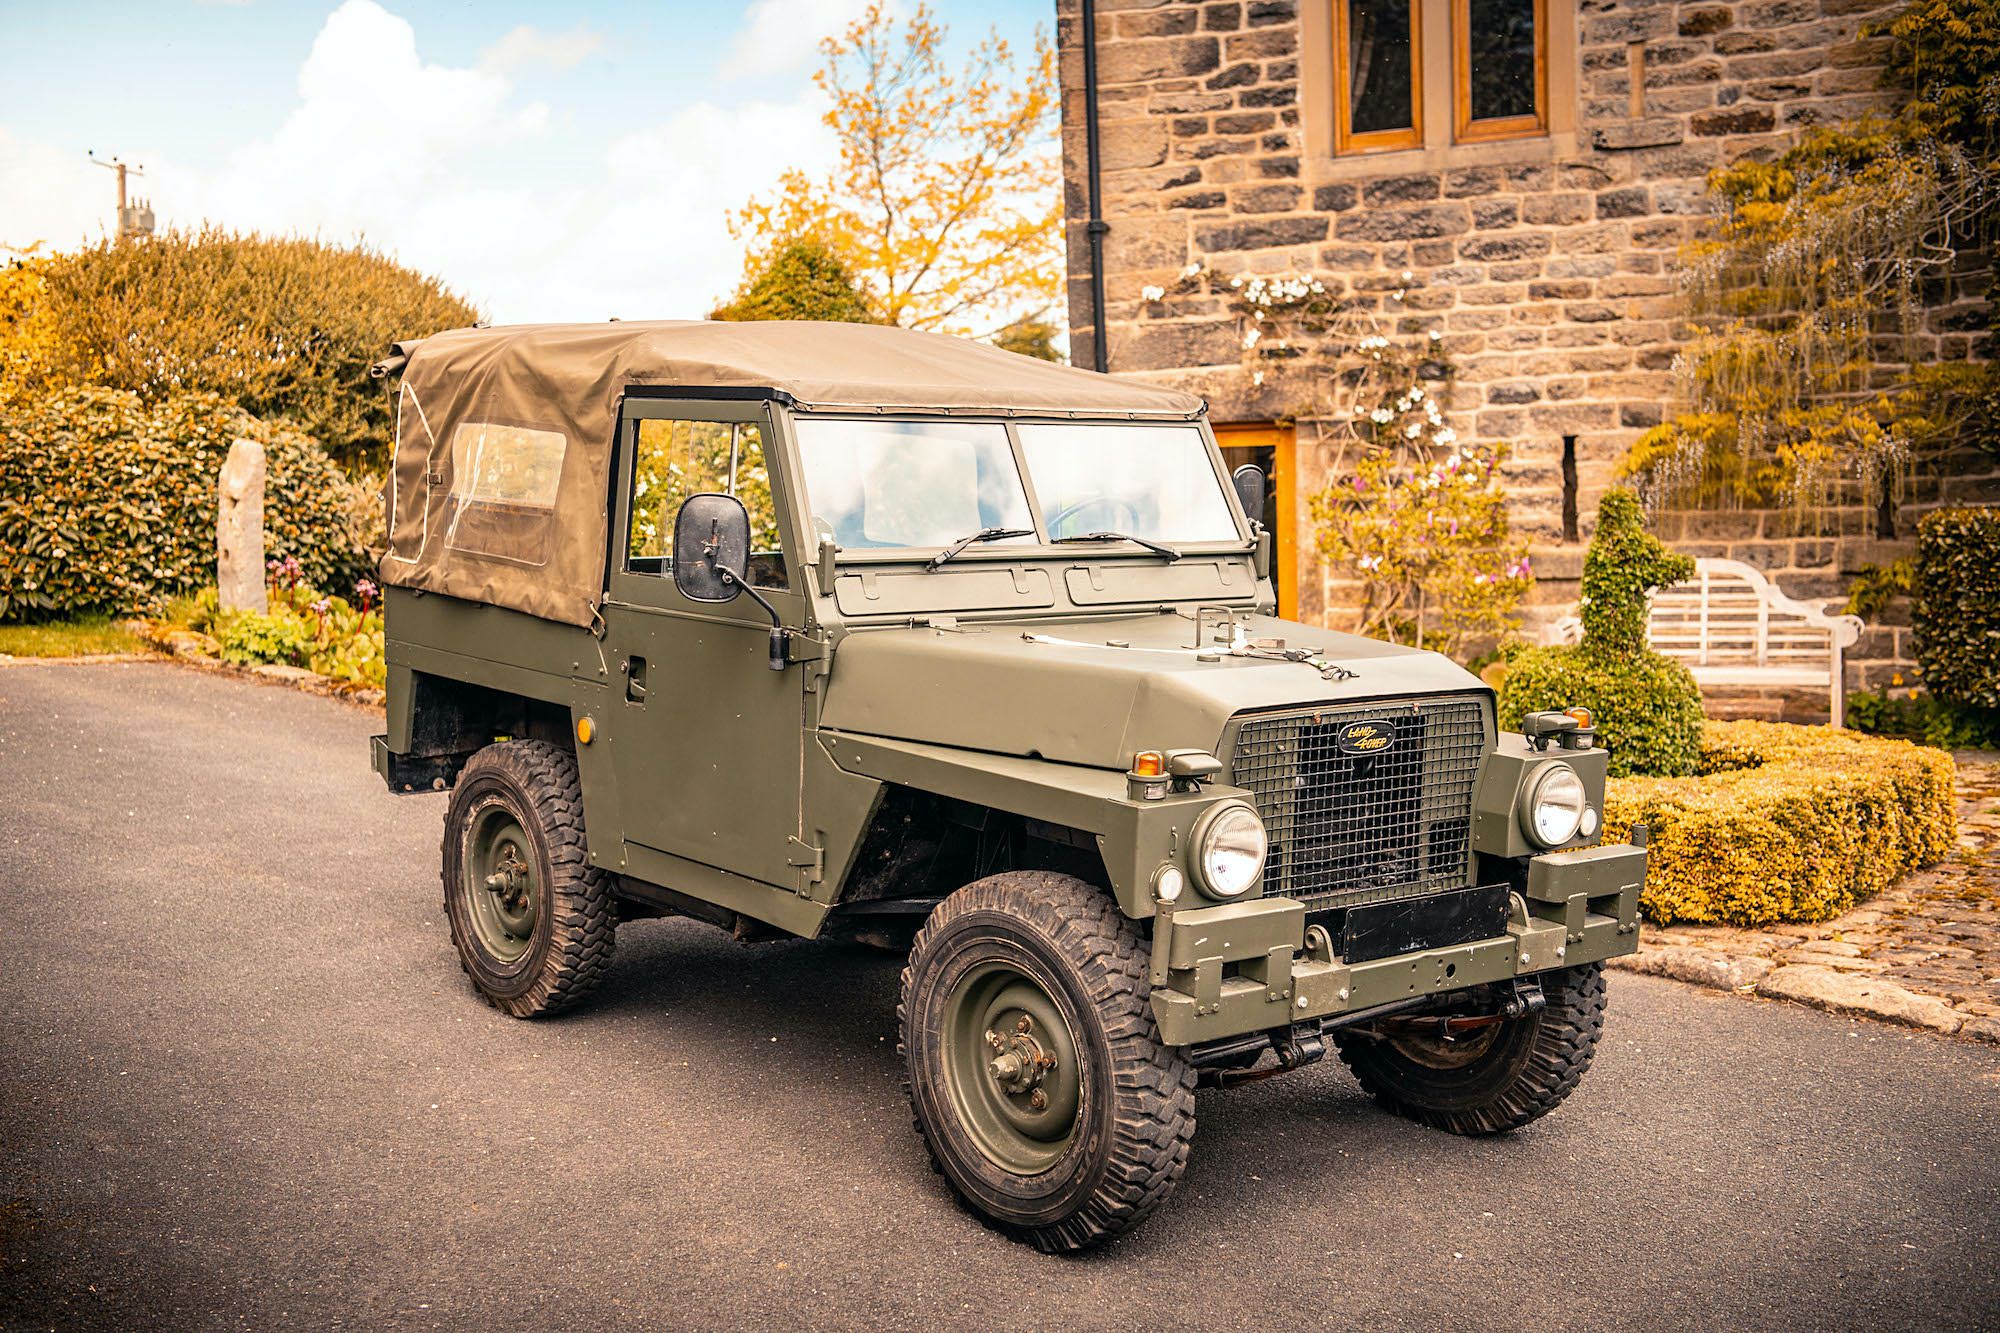 The Unusual Land Rover Lightweight Series 3